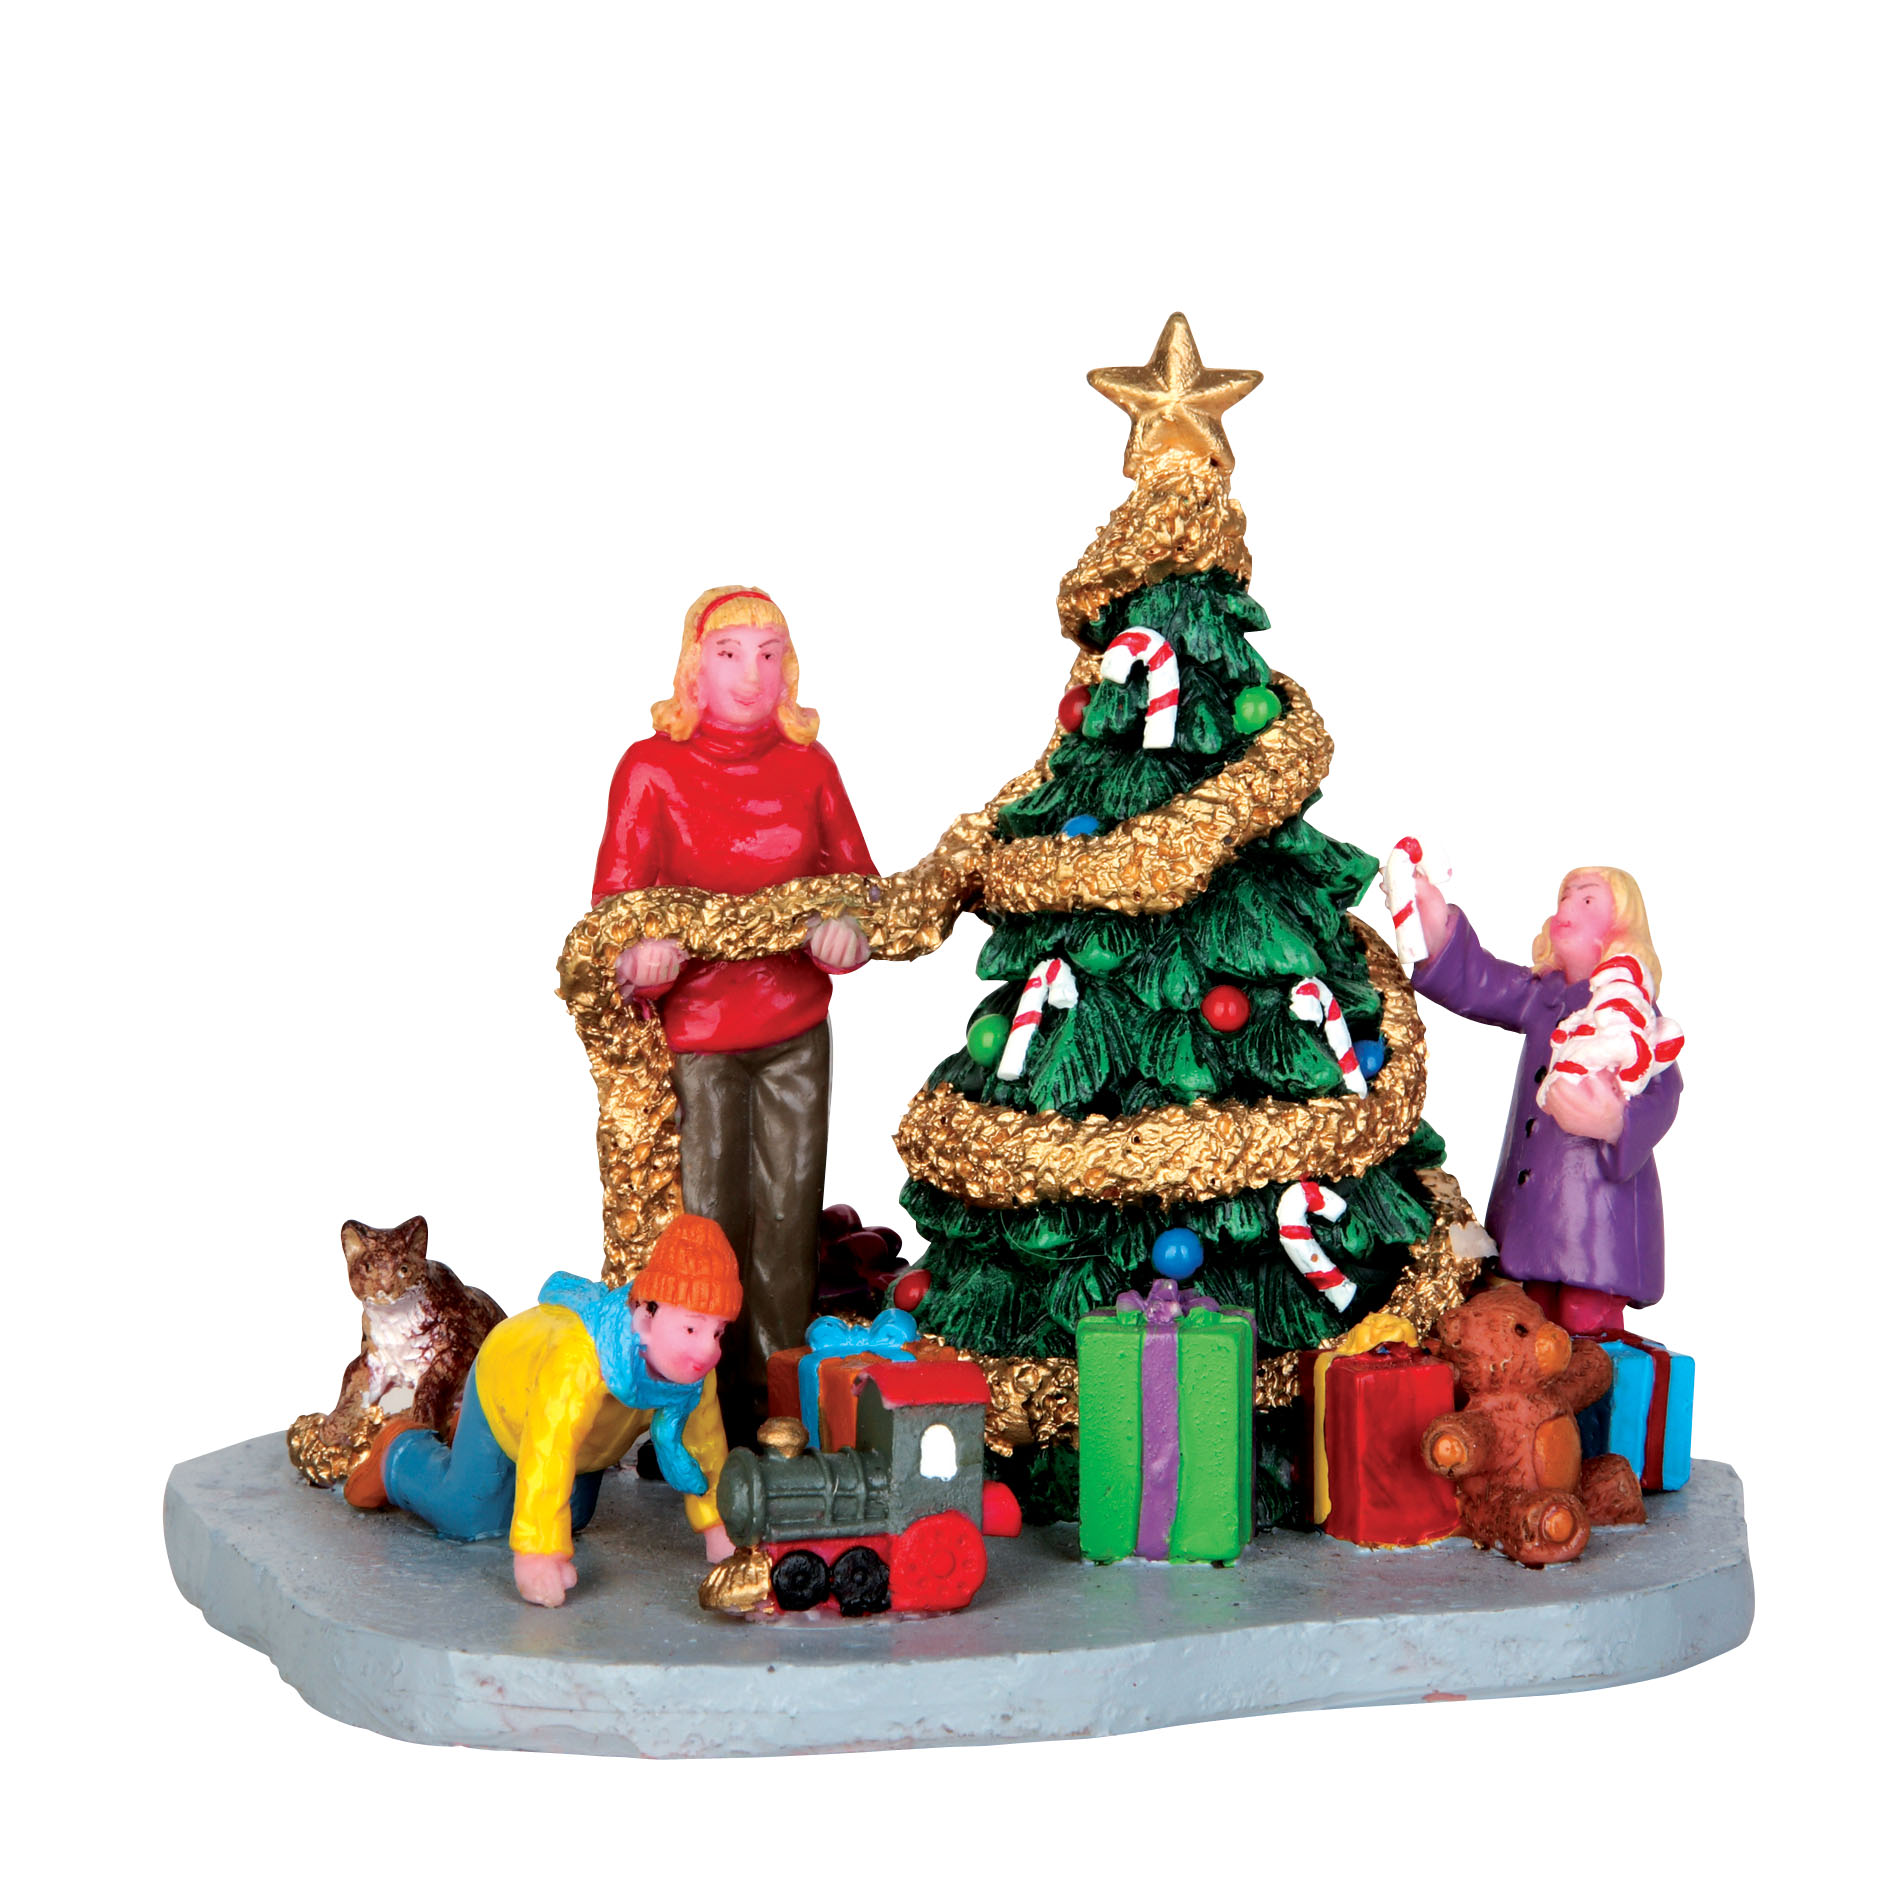 Lemax Village Collection Christmas Village Accessory, Decorating The Christmas Tree